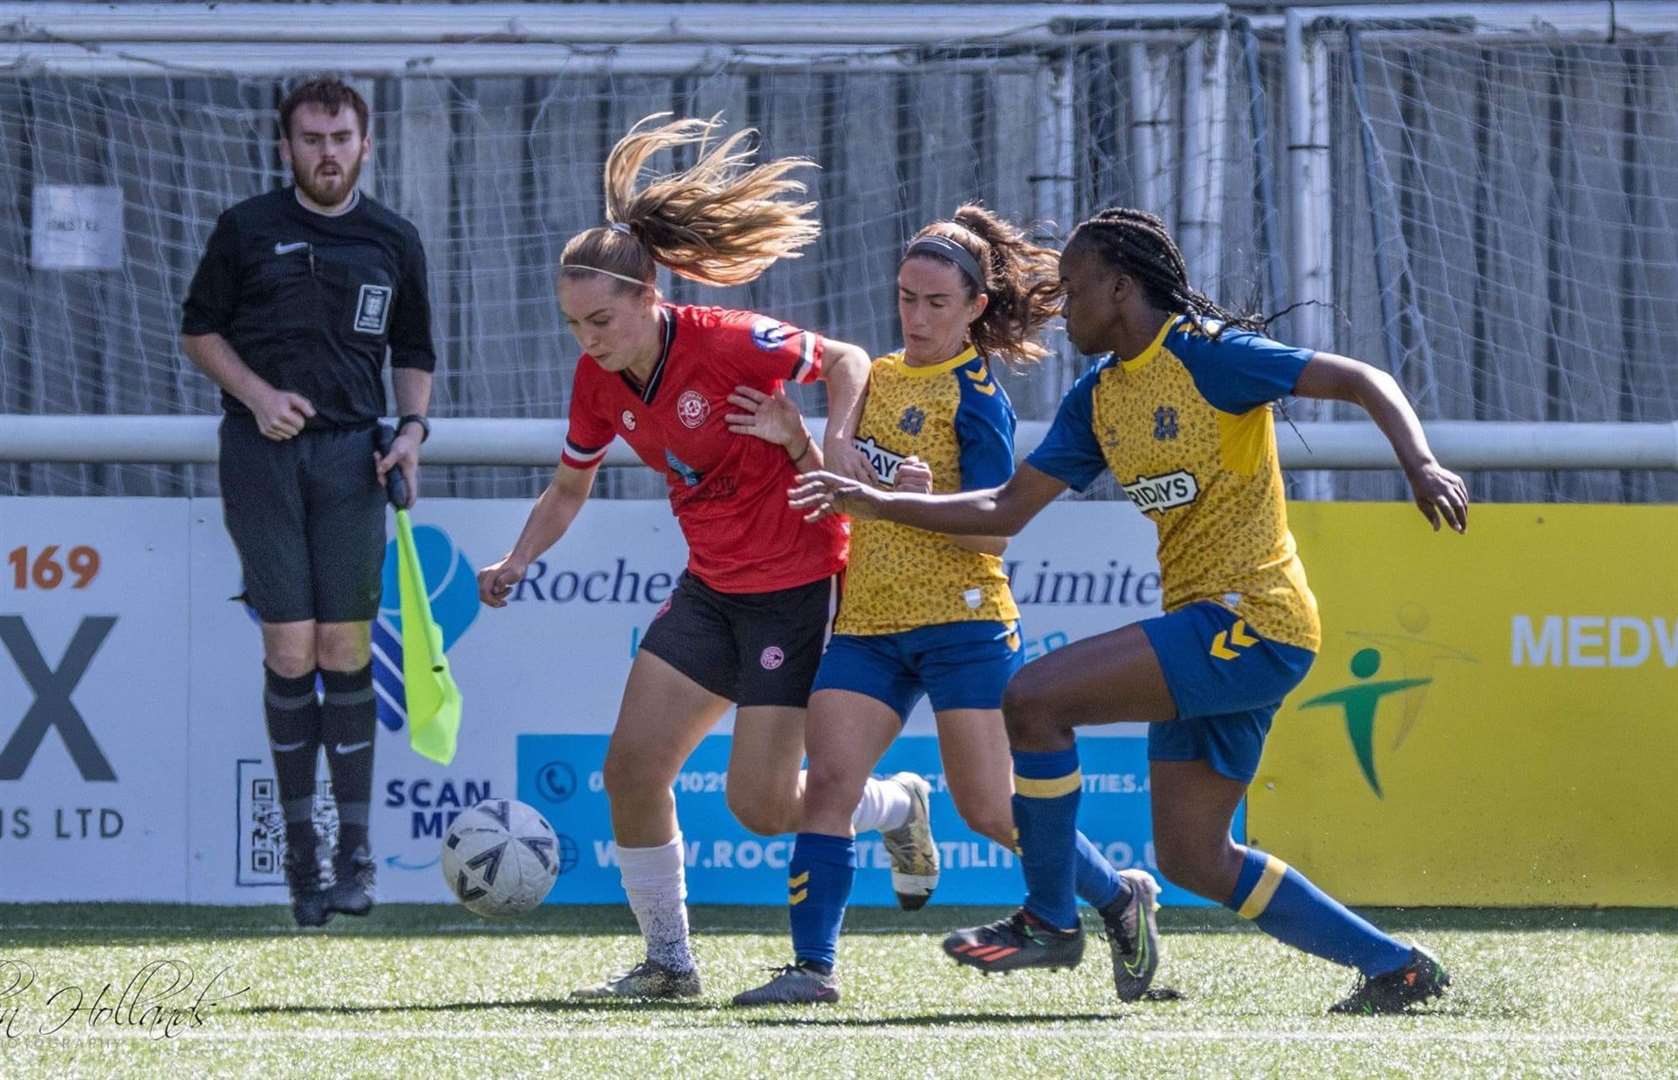 Georgia Pearch drives forward for Chatham Town Women against Hashtag United Women on Sunday Picture: Allen Hollands